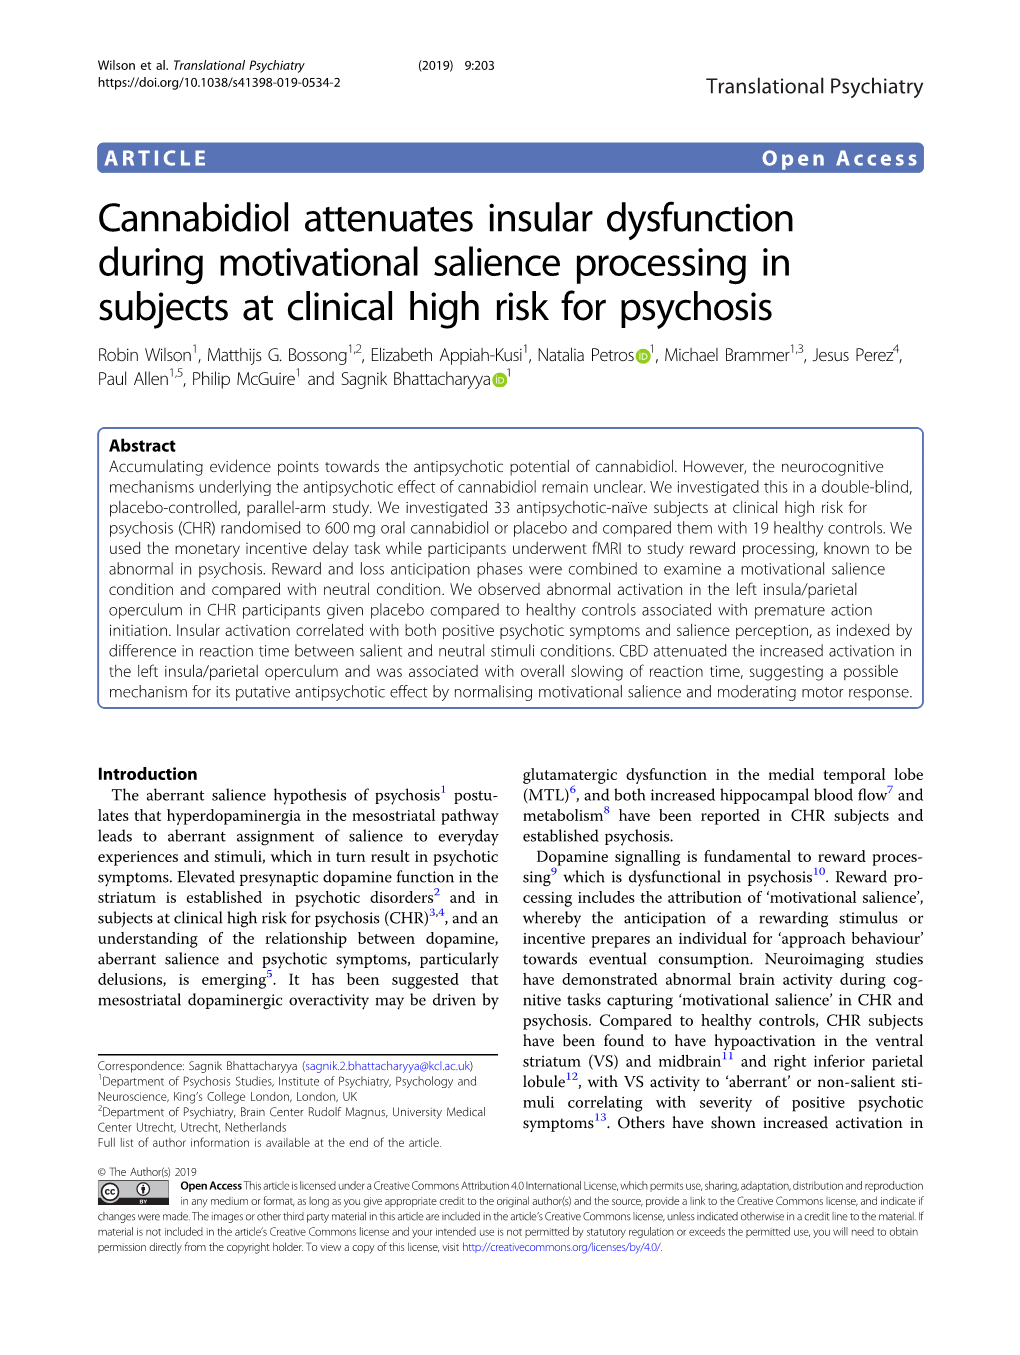 Cannabidiol Attenuates Insular Dysfunction During Motivational Salience Processing in Subjects at Clinical High Risk for Psychosis Robin Wilson1, Matthijs G